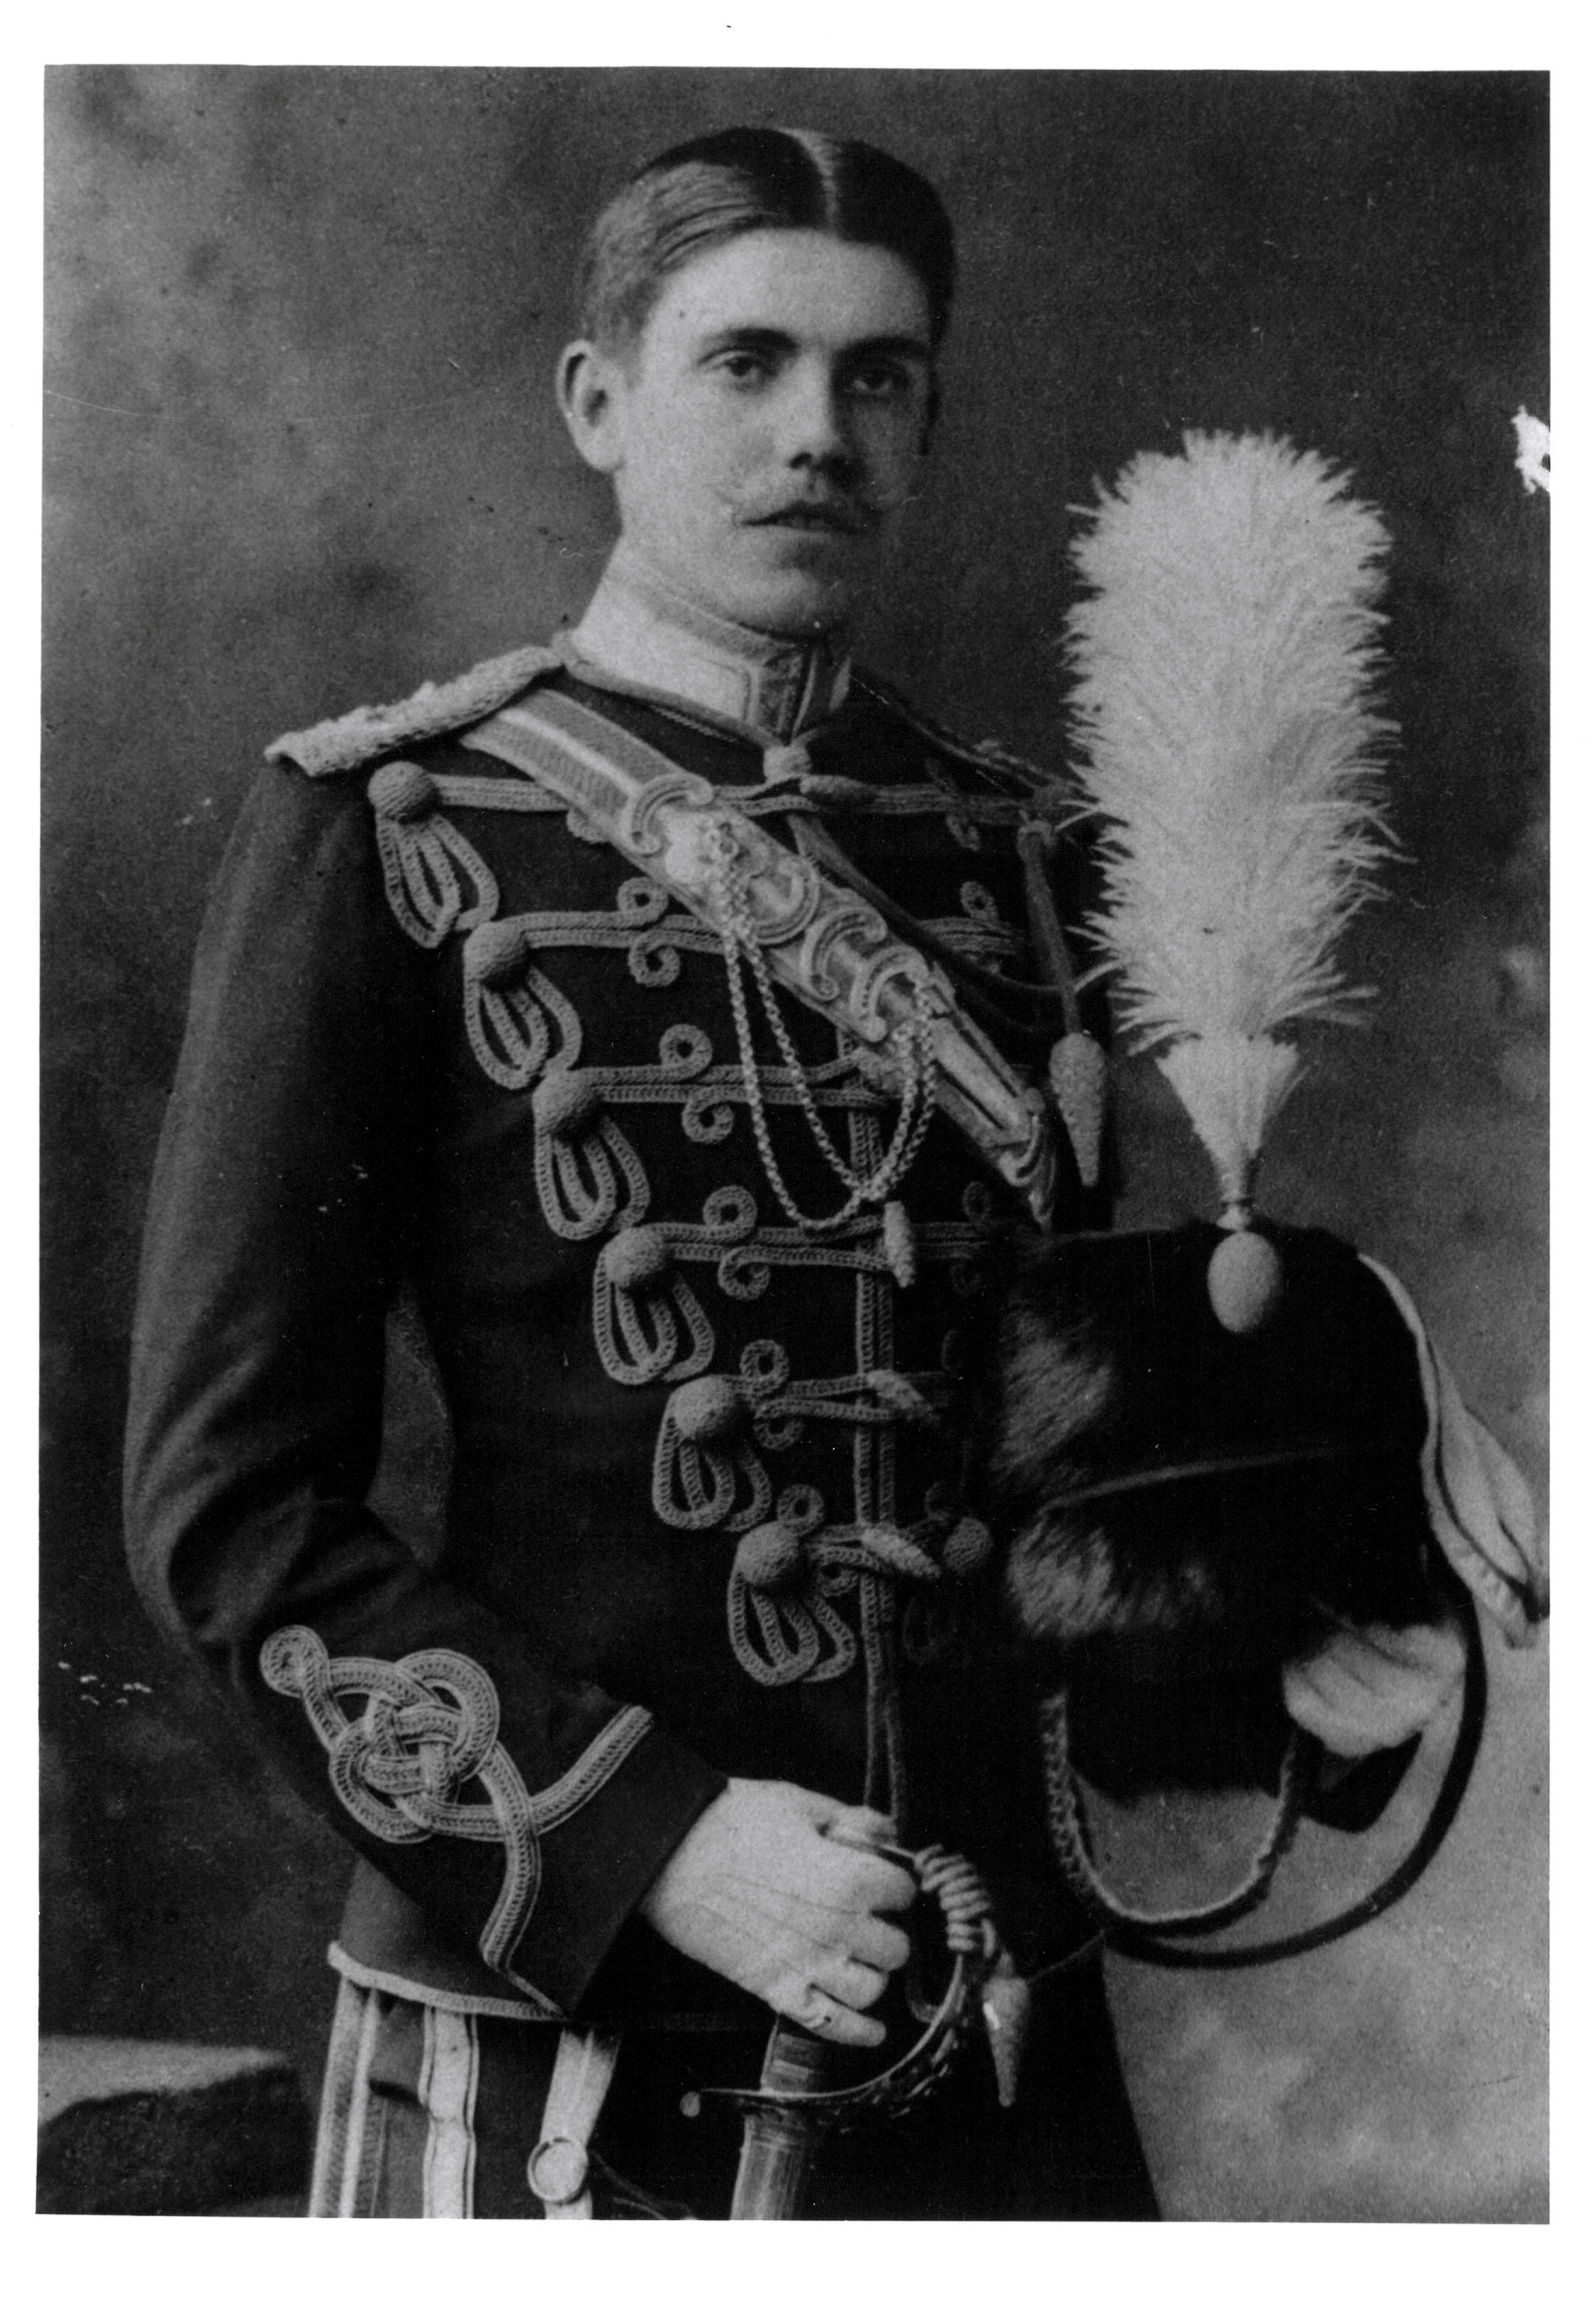 Clive Collingwood Dangar in the uniform of the 13th Hussars, photographer unknown, c1899